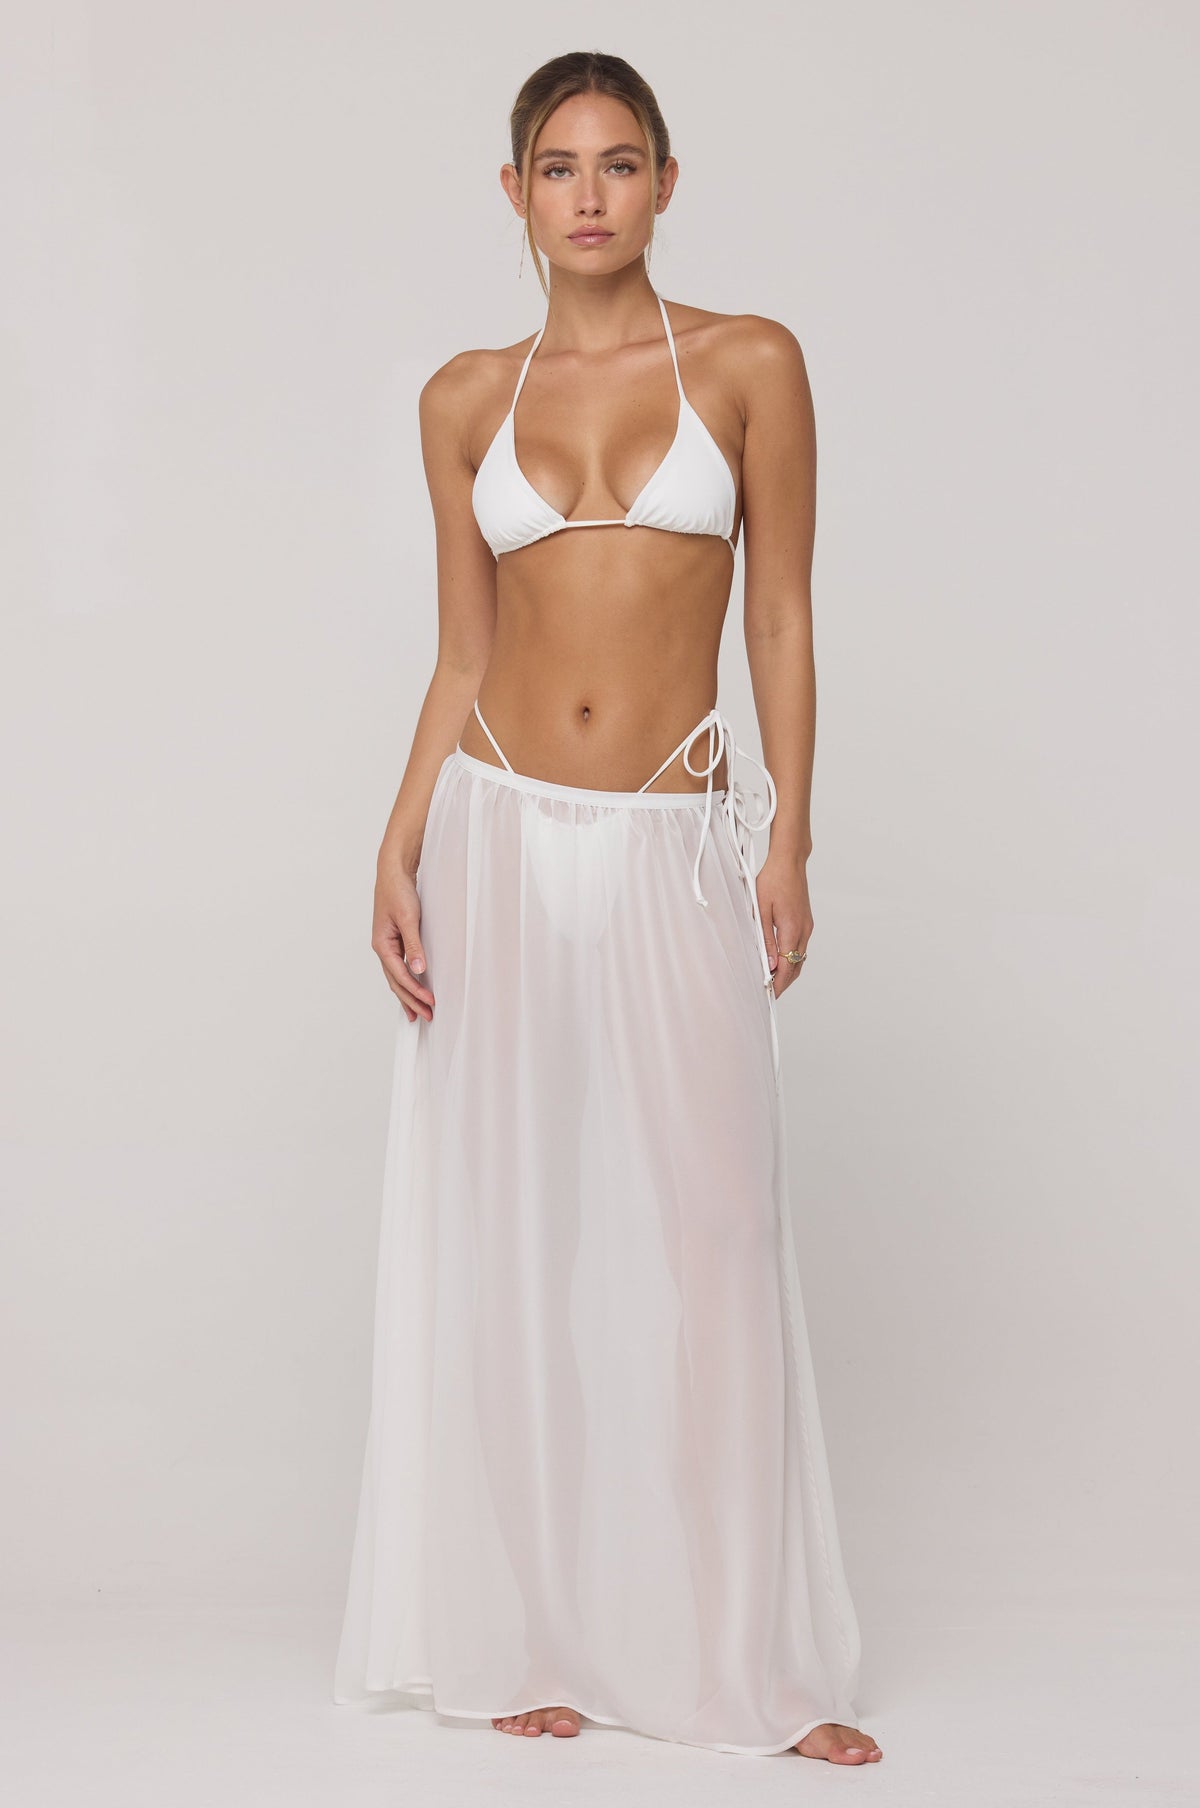 This is an image of Kyle Triangle Bikini Top in White - RESA featuring a model wearing the dress